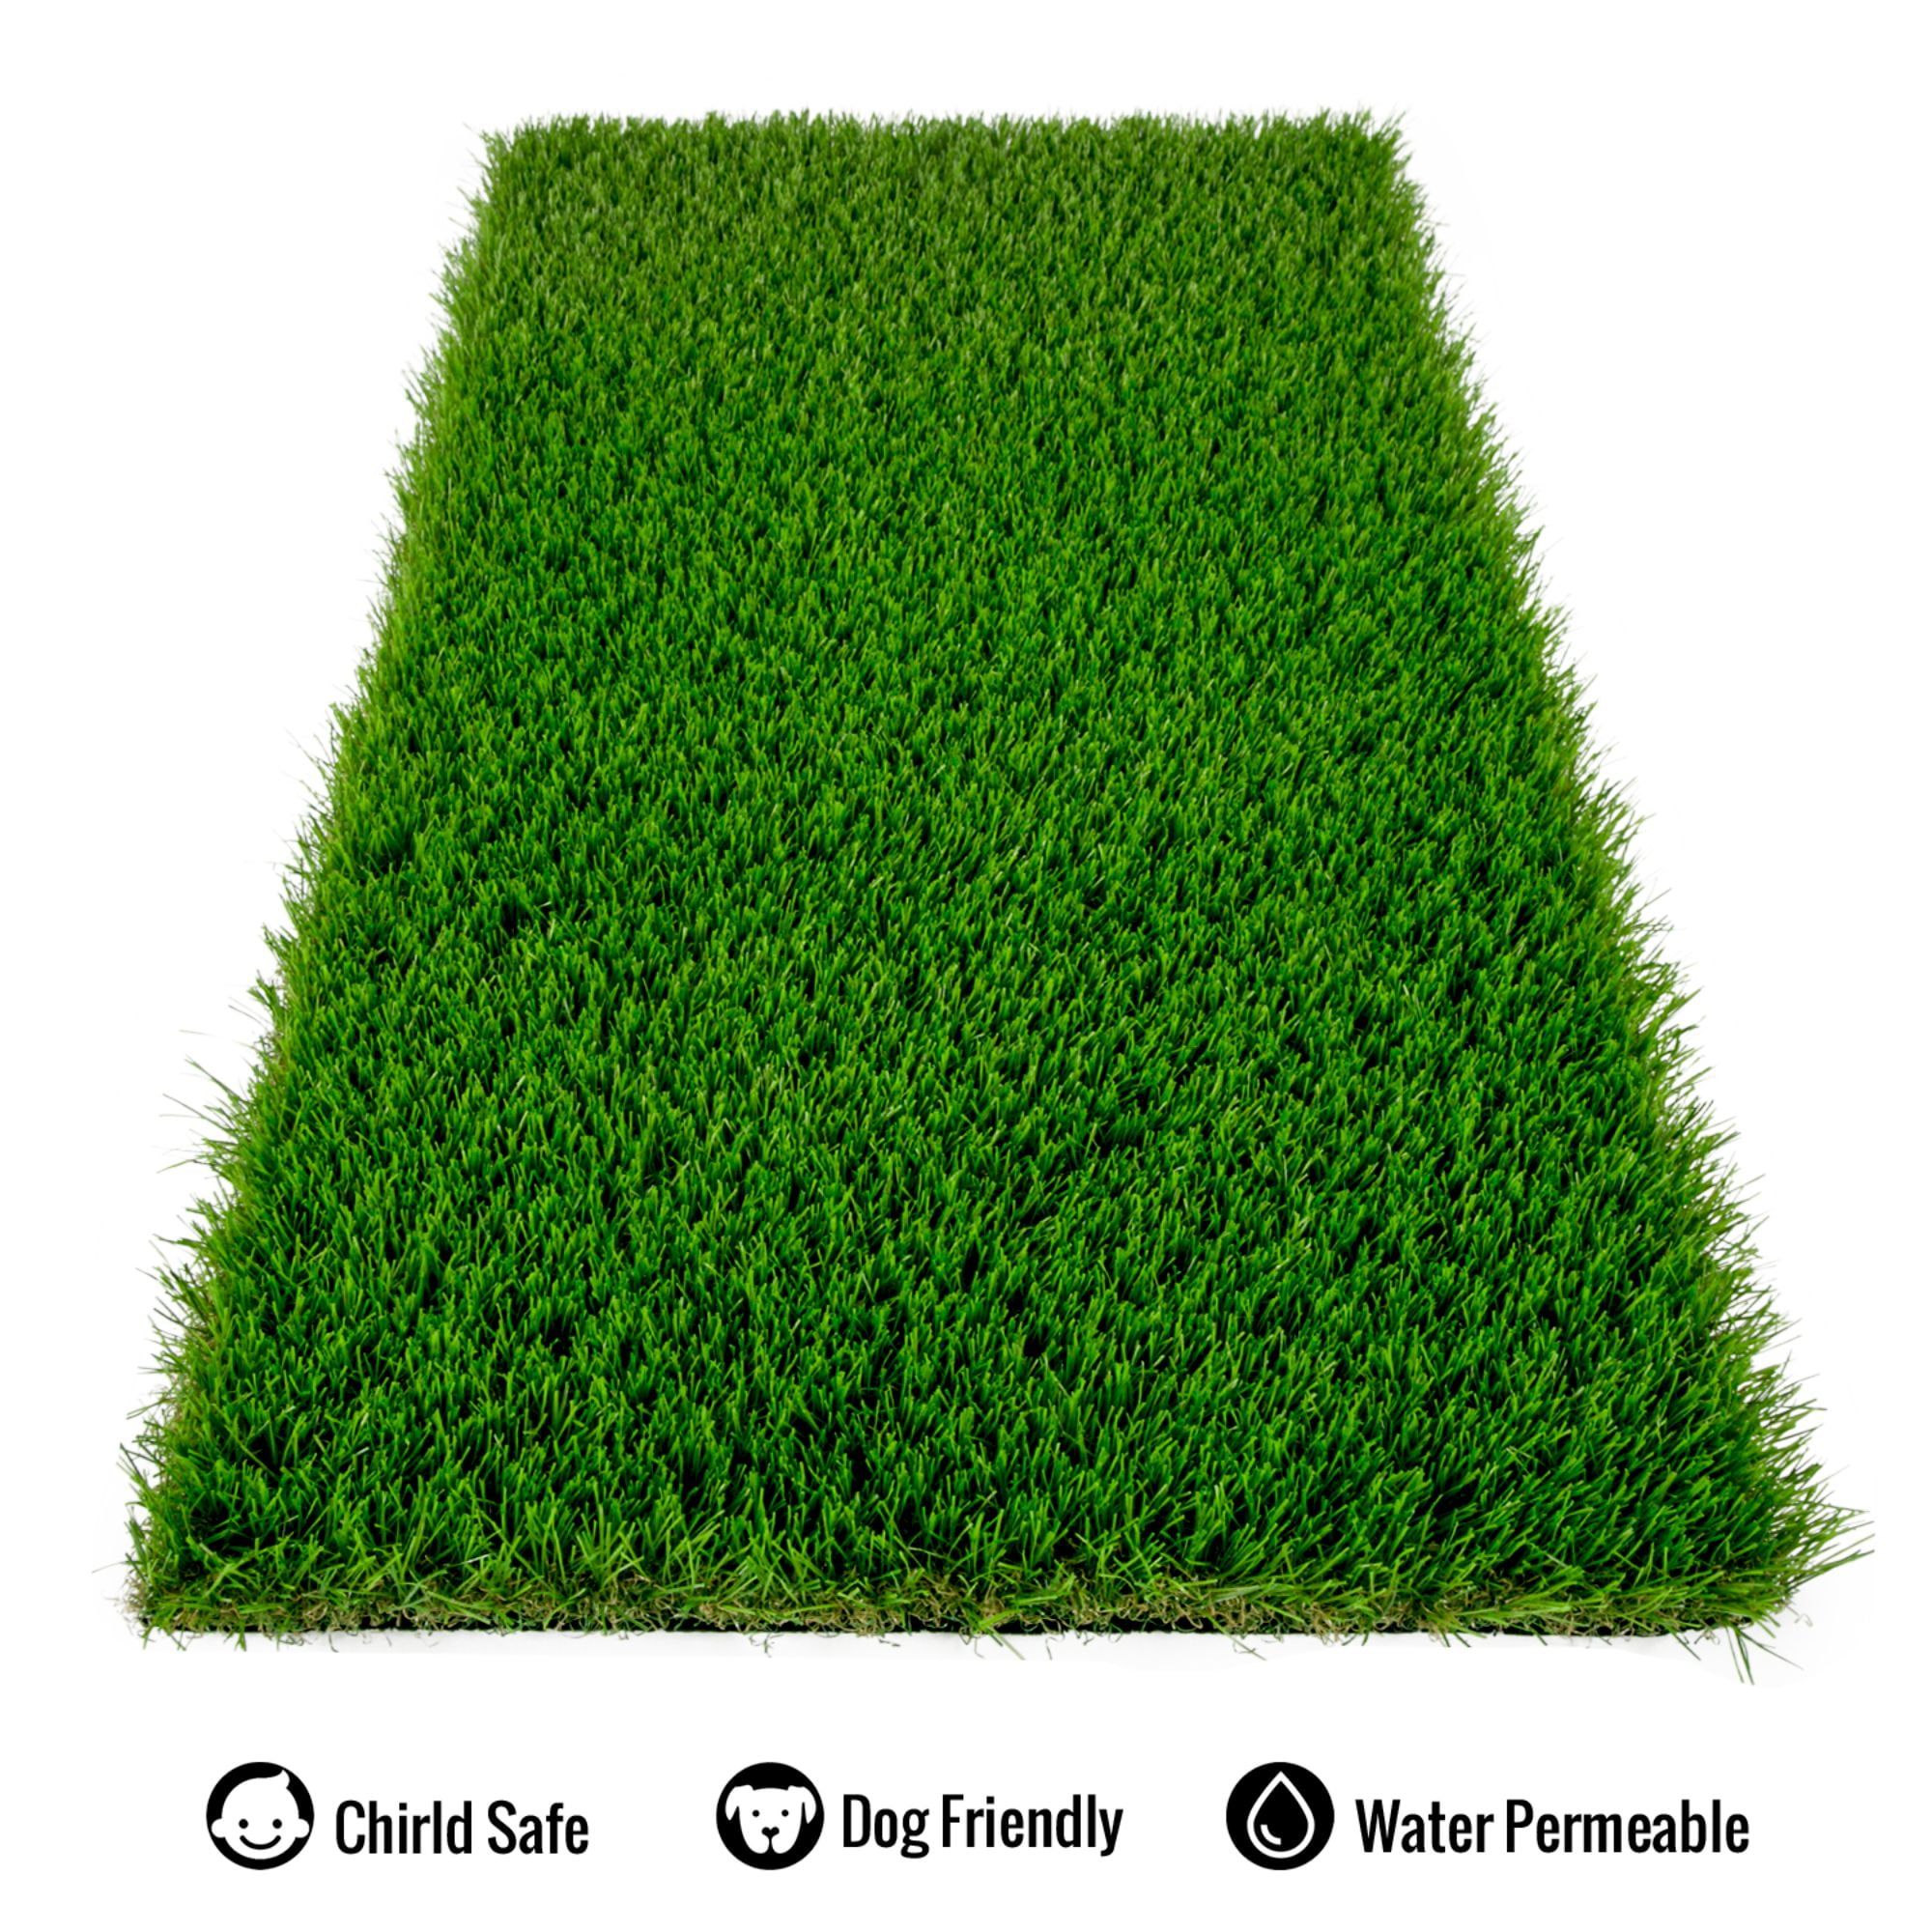 Details about   Synthetic Grass Artificial Lawn Fake Grass Patch Garden Decor Green 4PC 